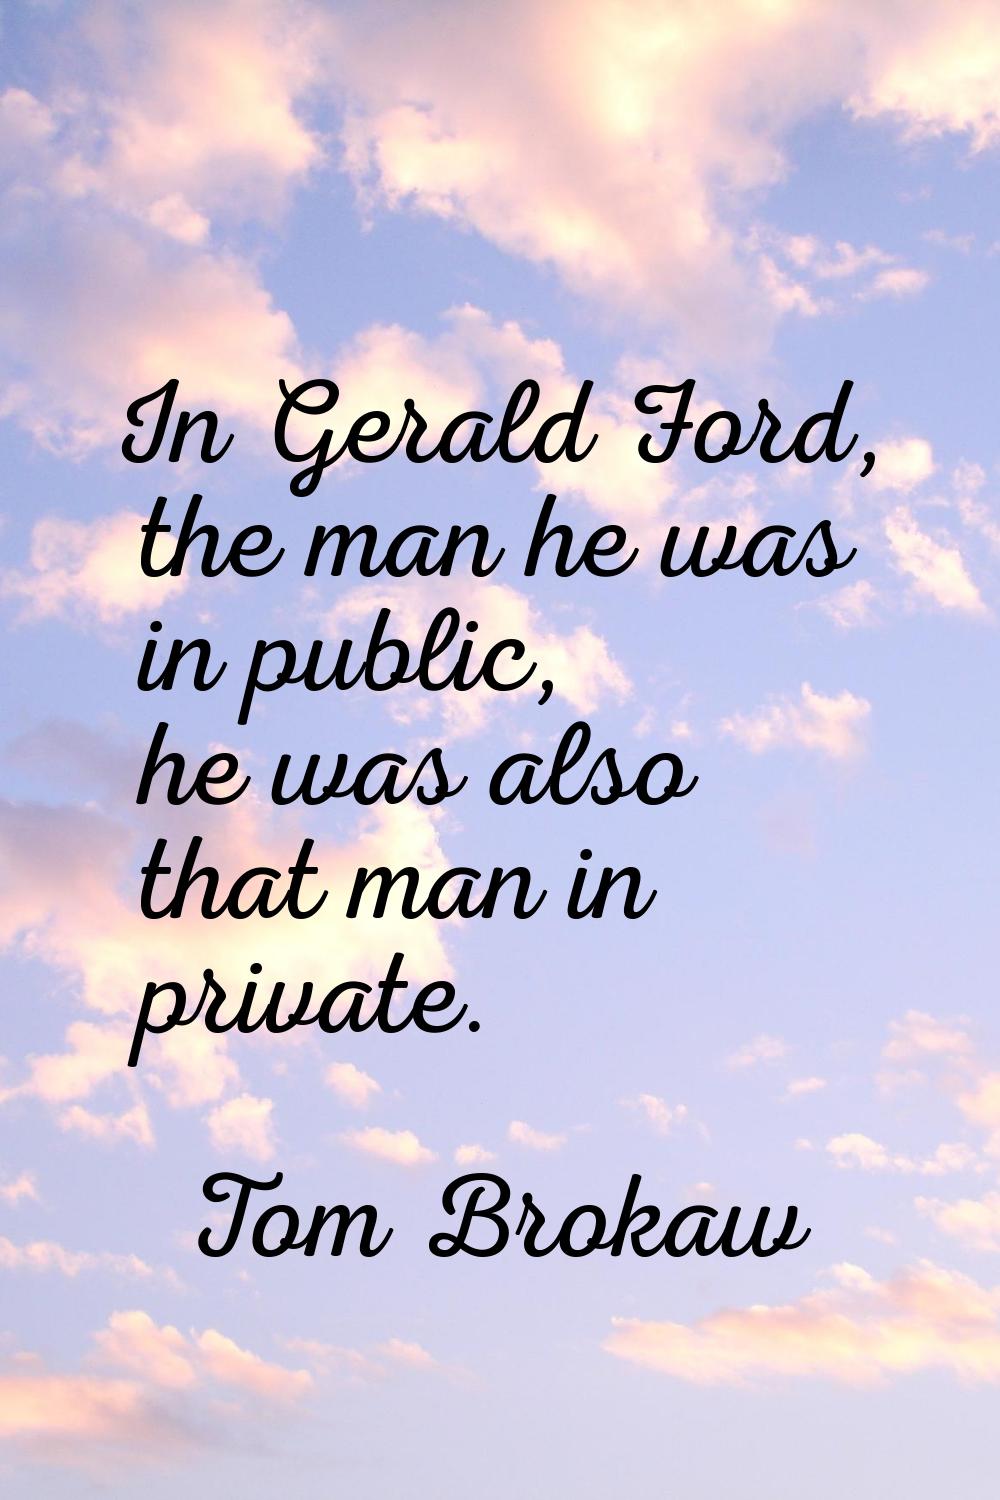 In Gerald Ford, the man he was in public, he was also that man in private.